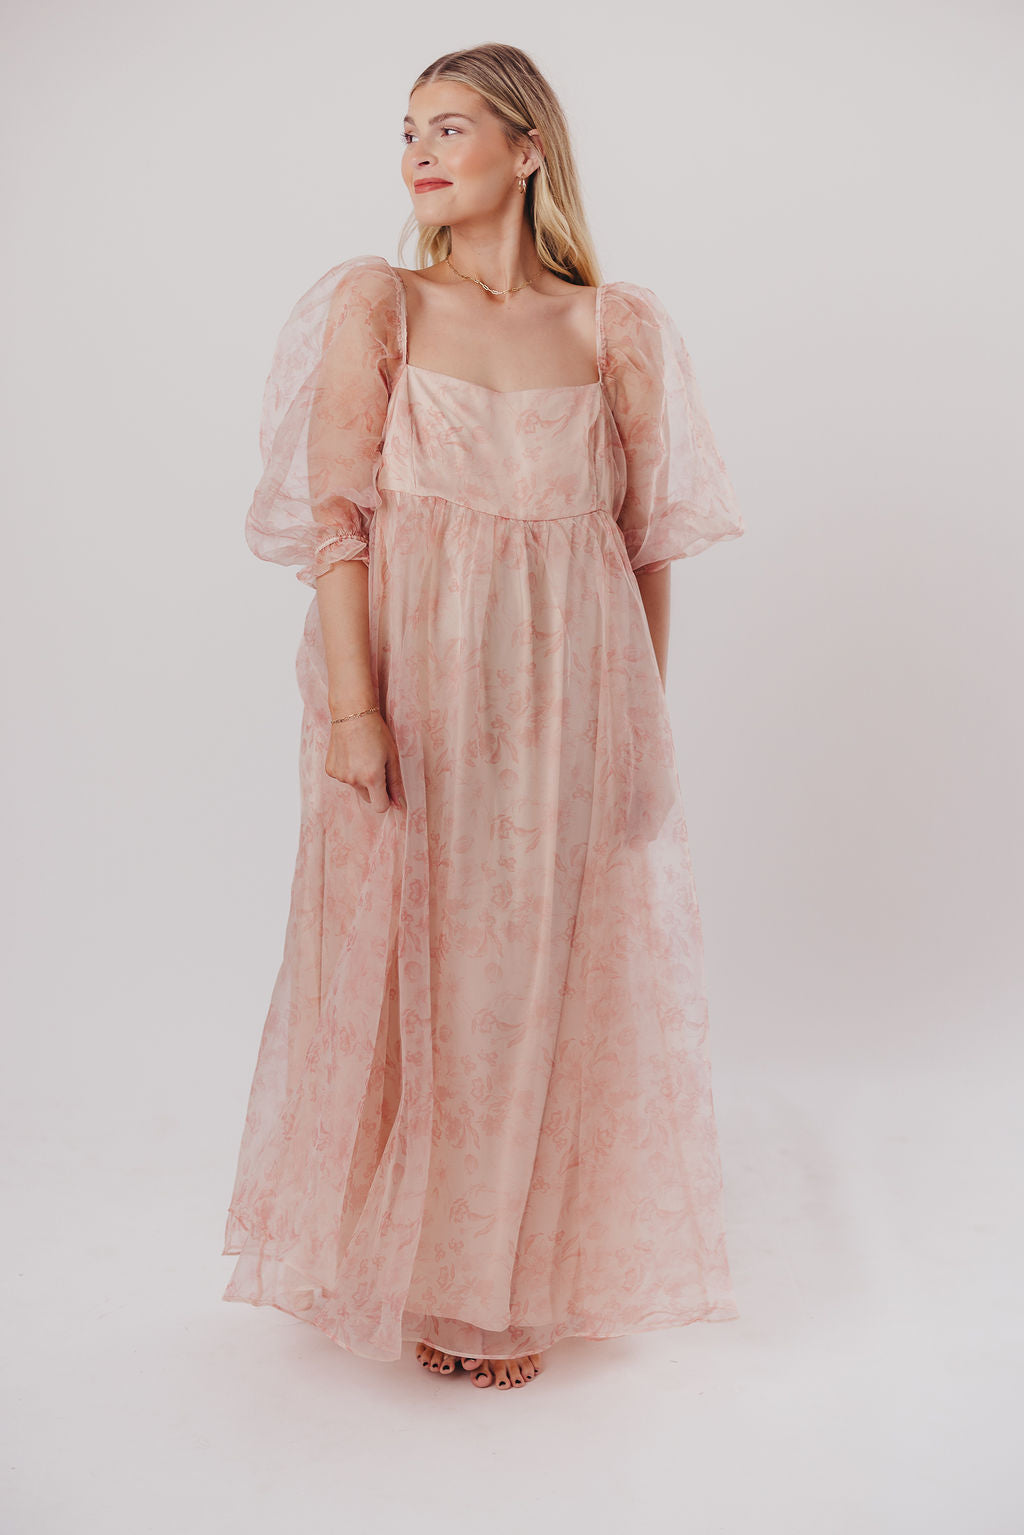 *New* Mona Maxi Dress with Smocking in Pink Floral - Bump Friendly & Inclusive Sizing (S-3XL)